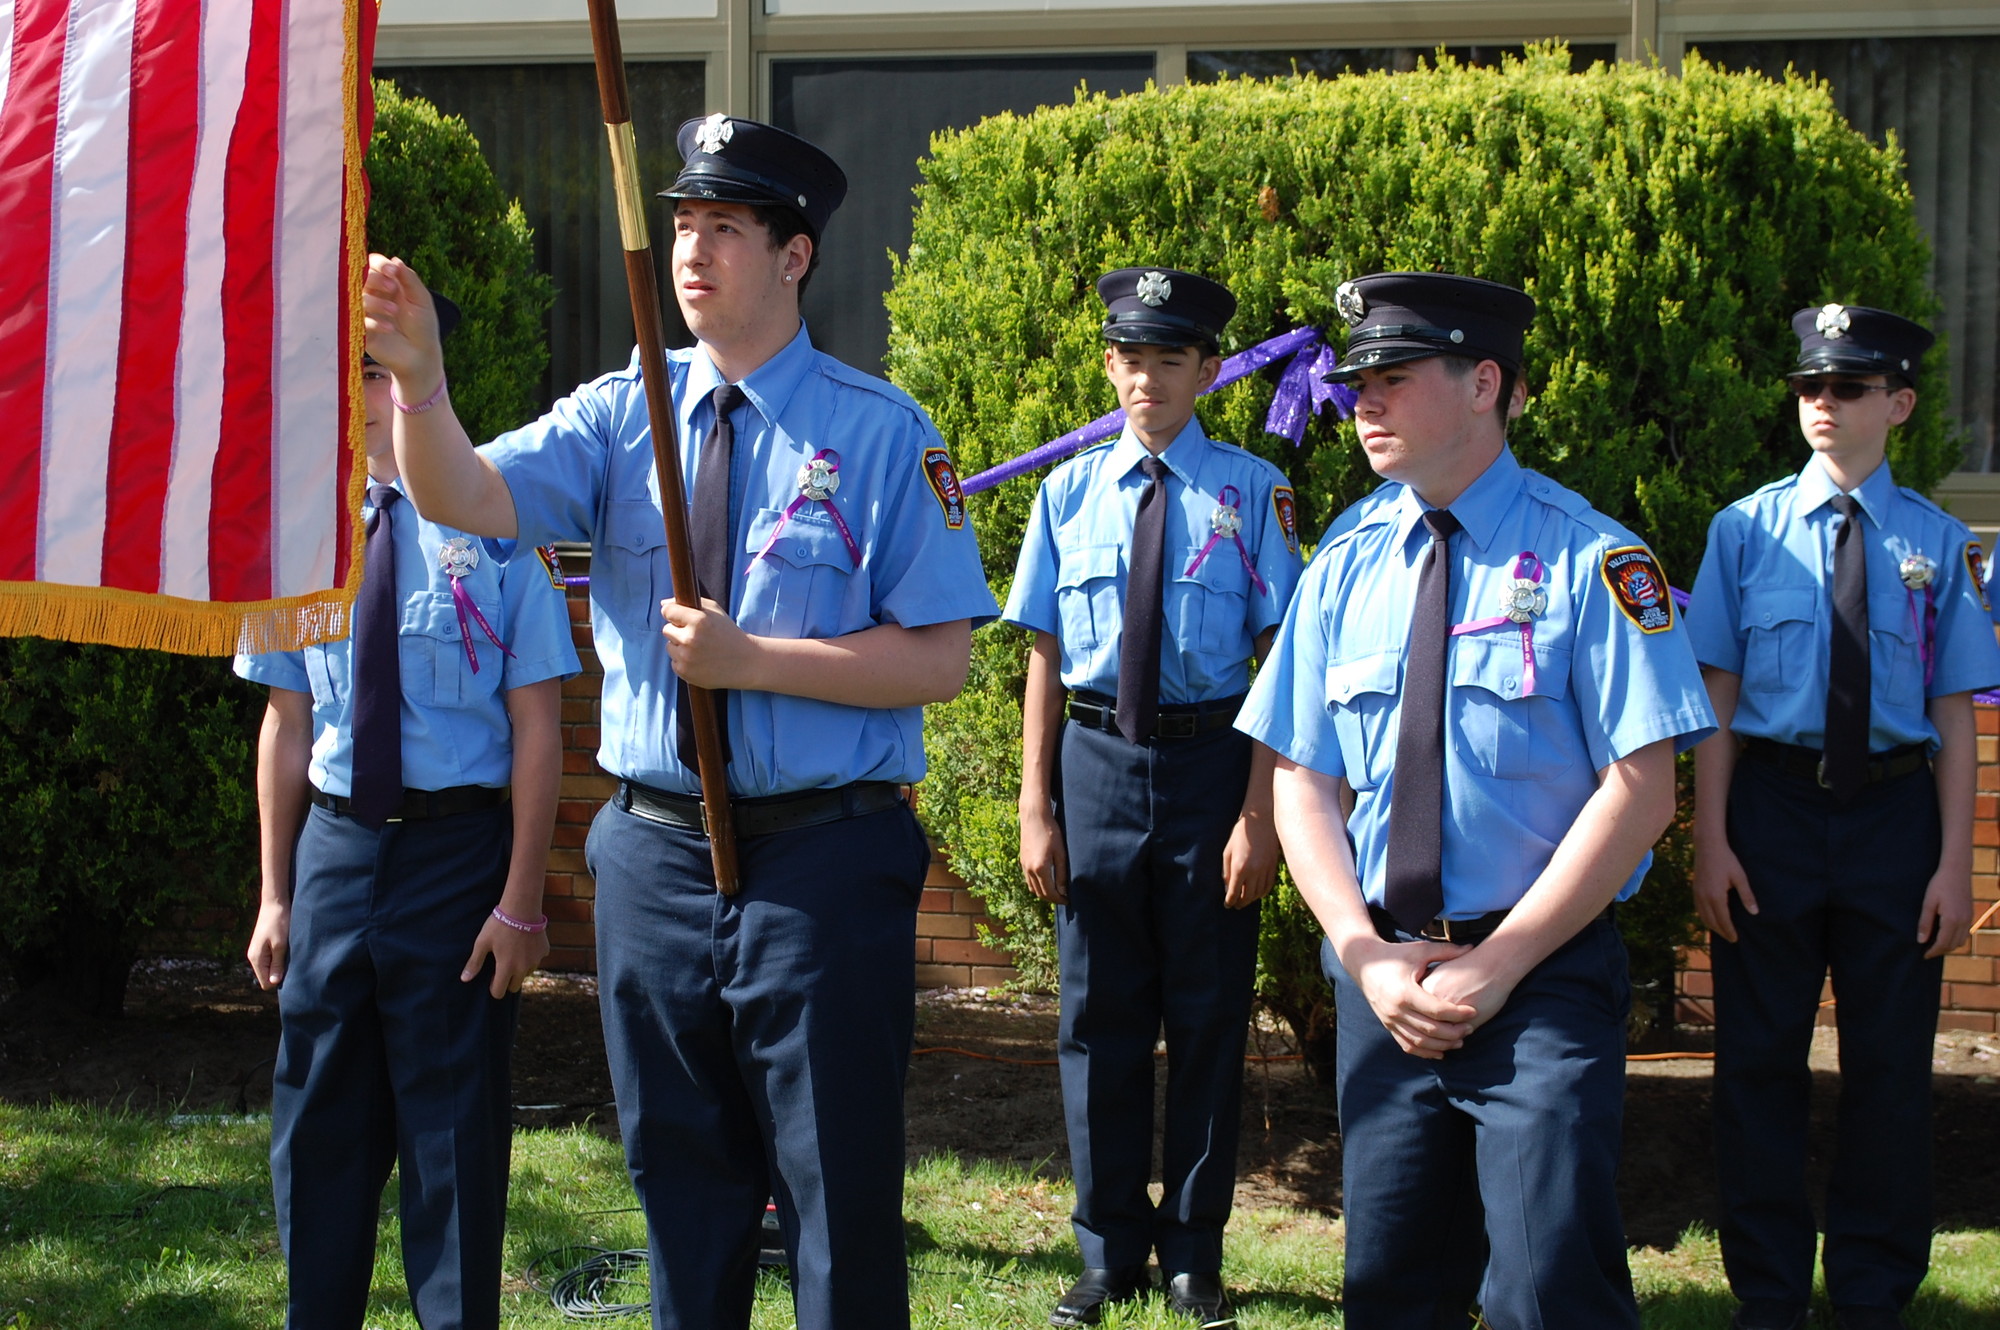 Chris Schroeder was a member of the Junior Fire Department, which had a color guard at the ceremony.